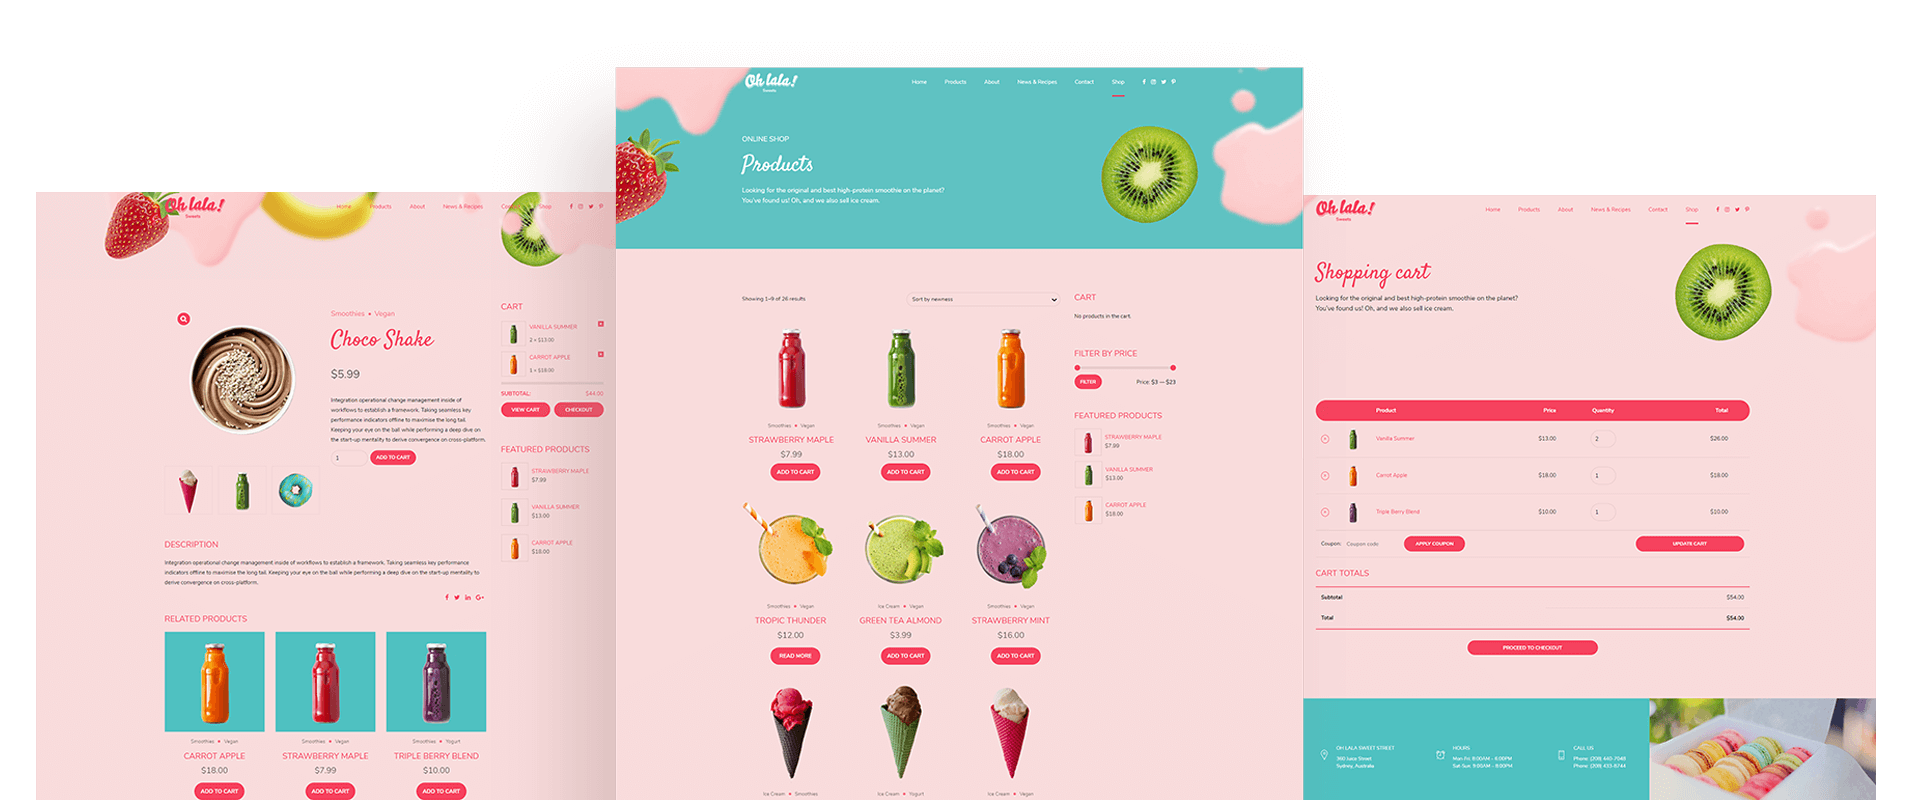 http://yogopink.com/wp-content/uploads/2017/05/sample_shop_preview.png